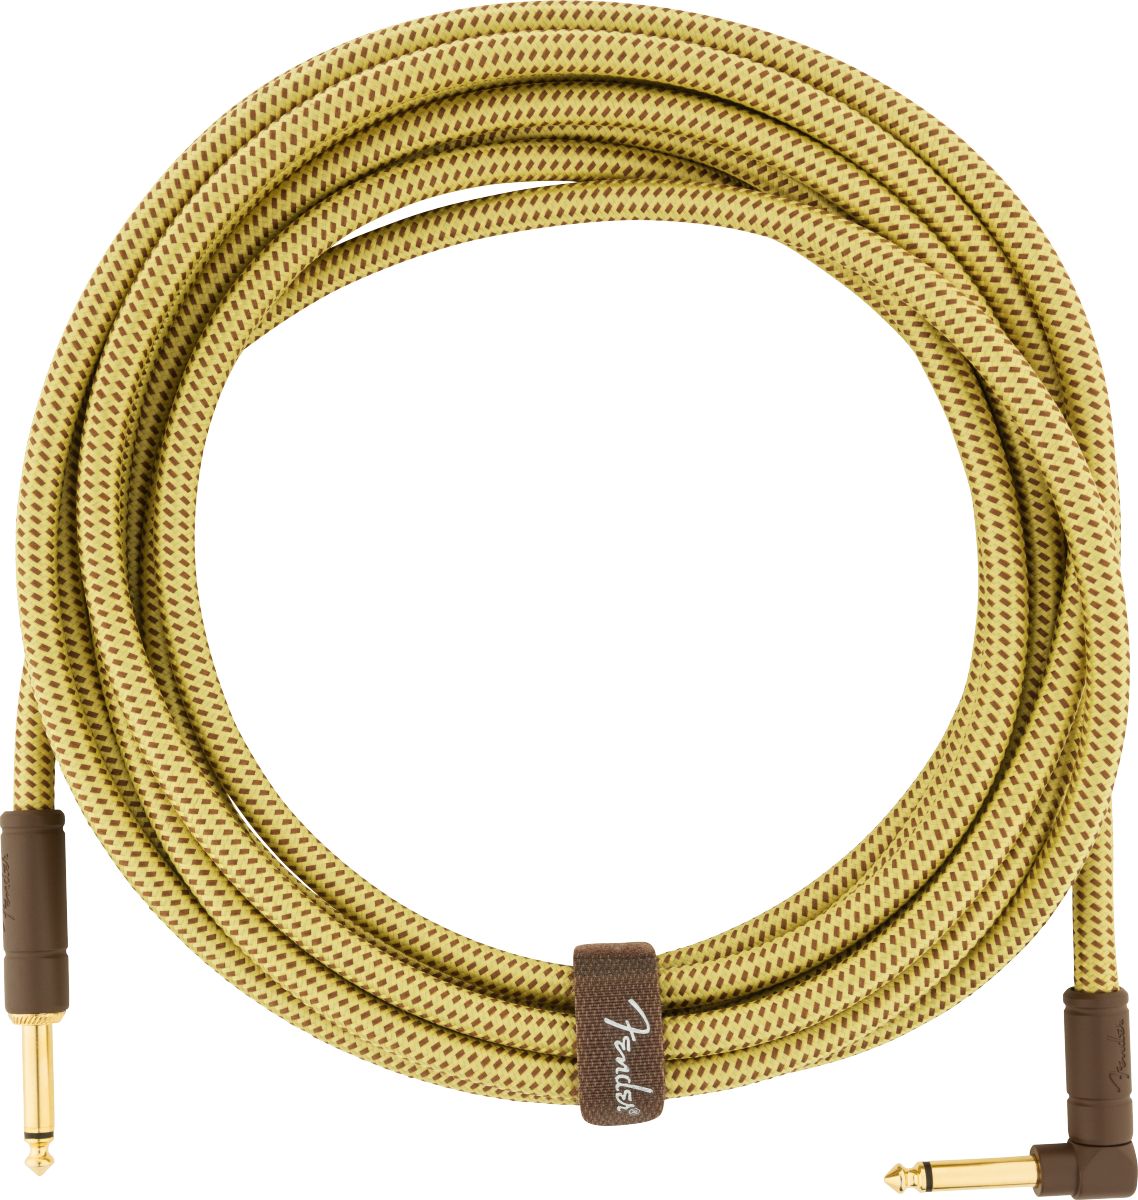 Fender Deluxe Series Instrument Cable 5,5m Angled Tweed